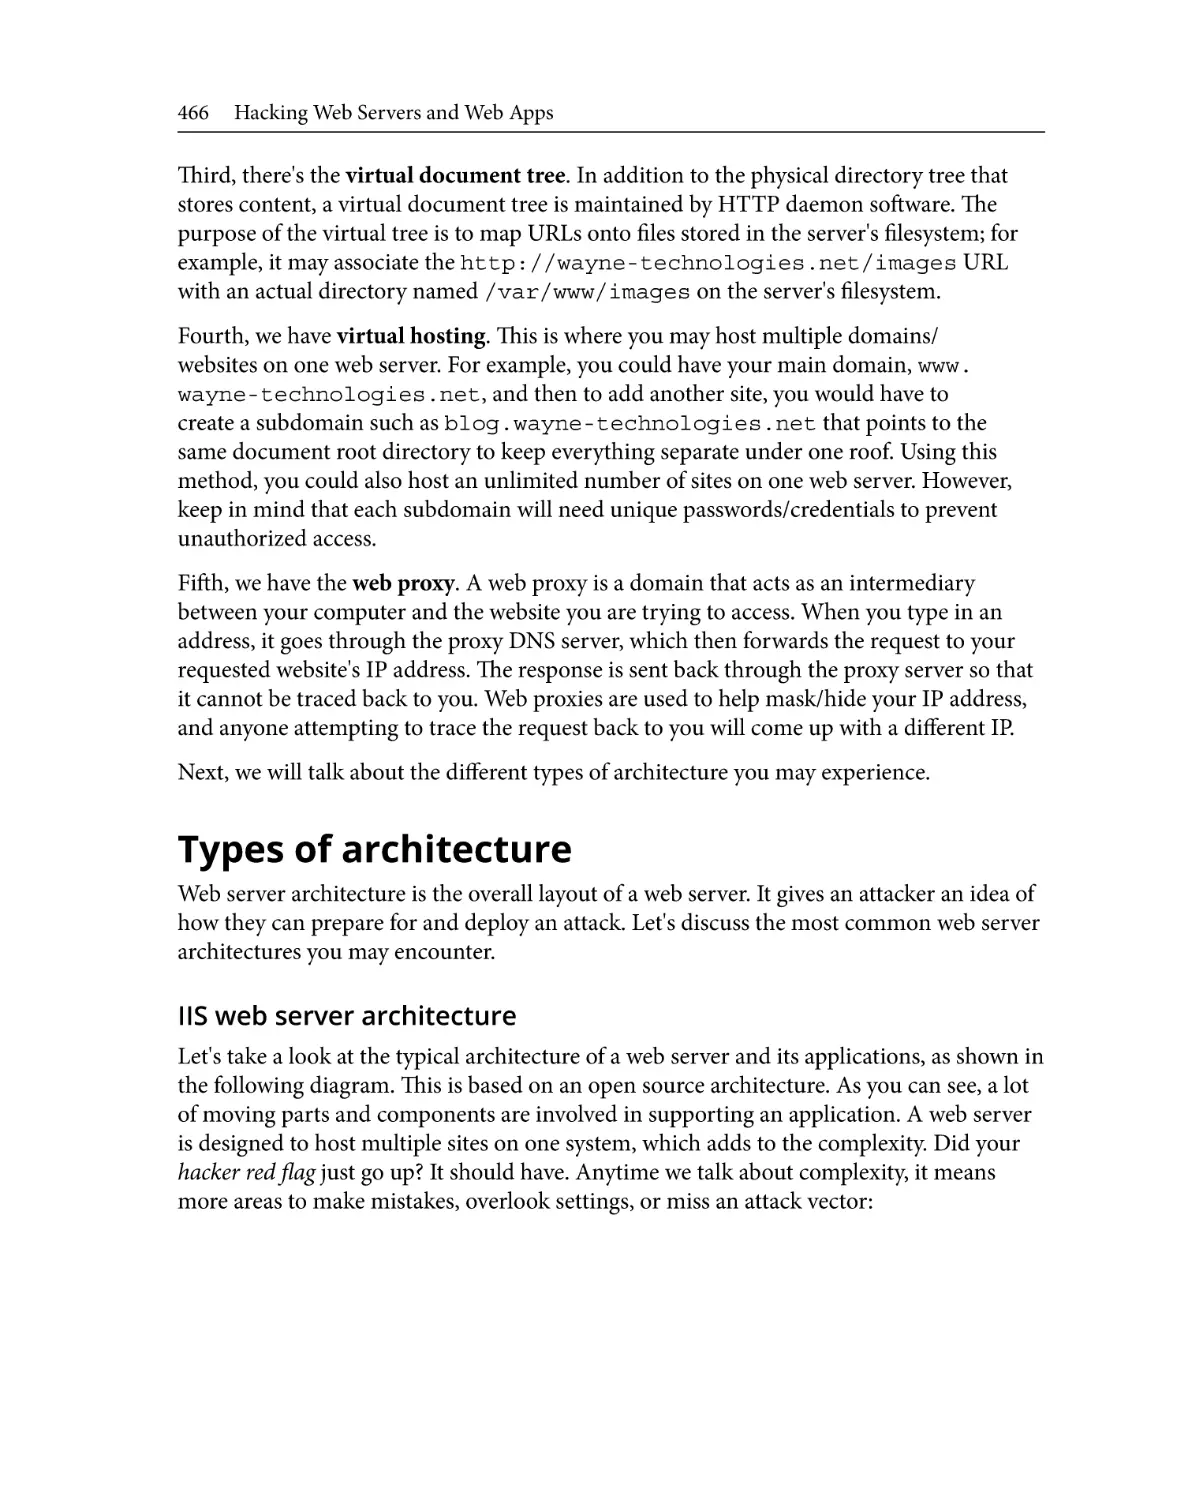 Types of architecture